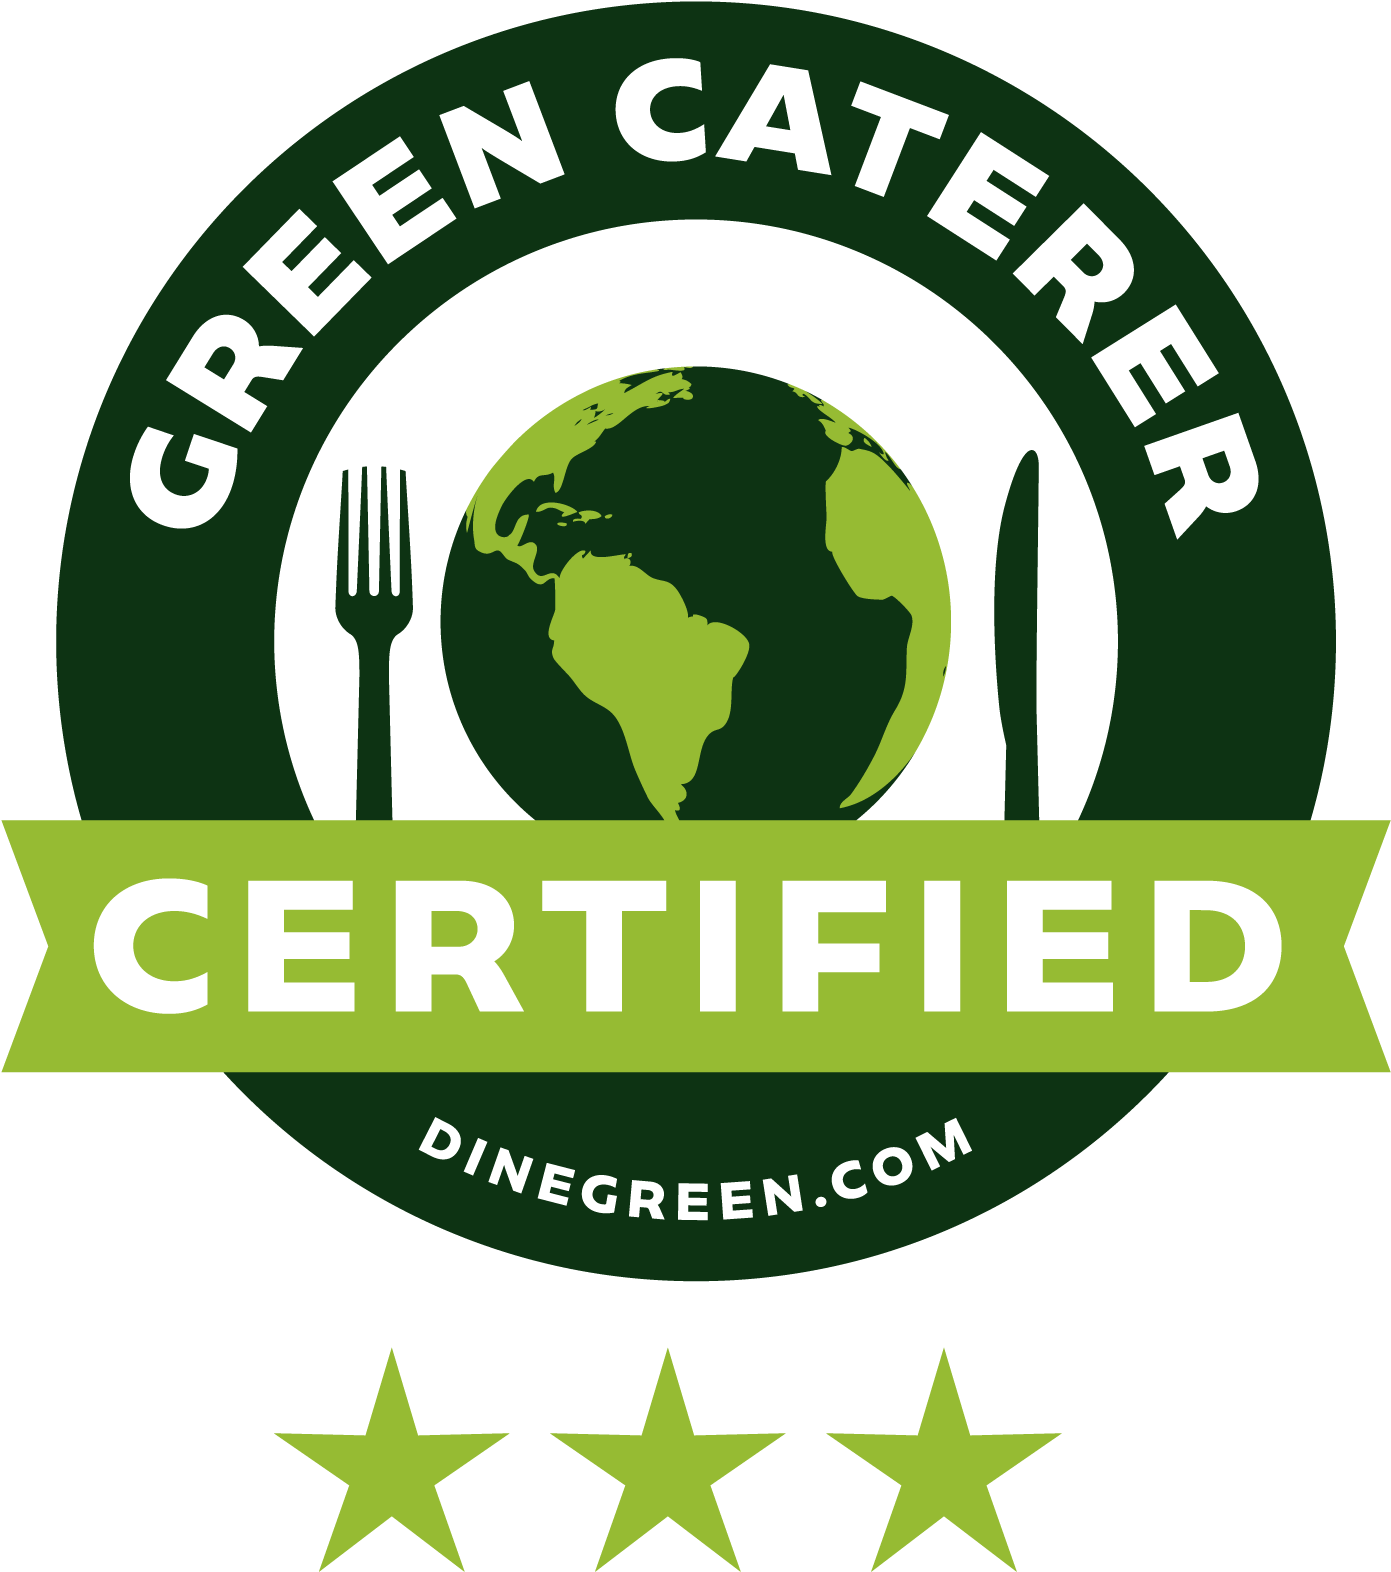 Green Caterer Certified Logo PNG